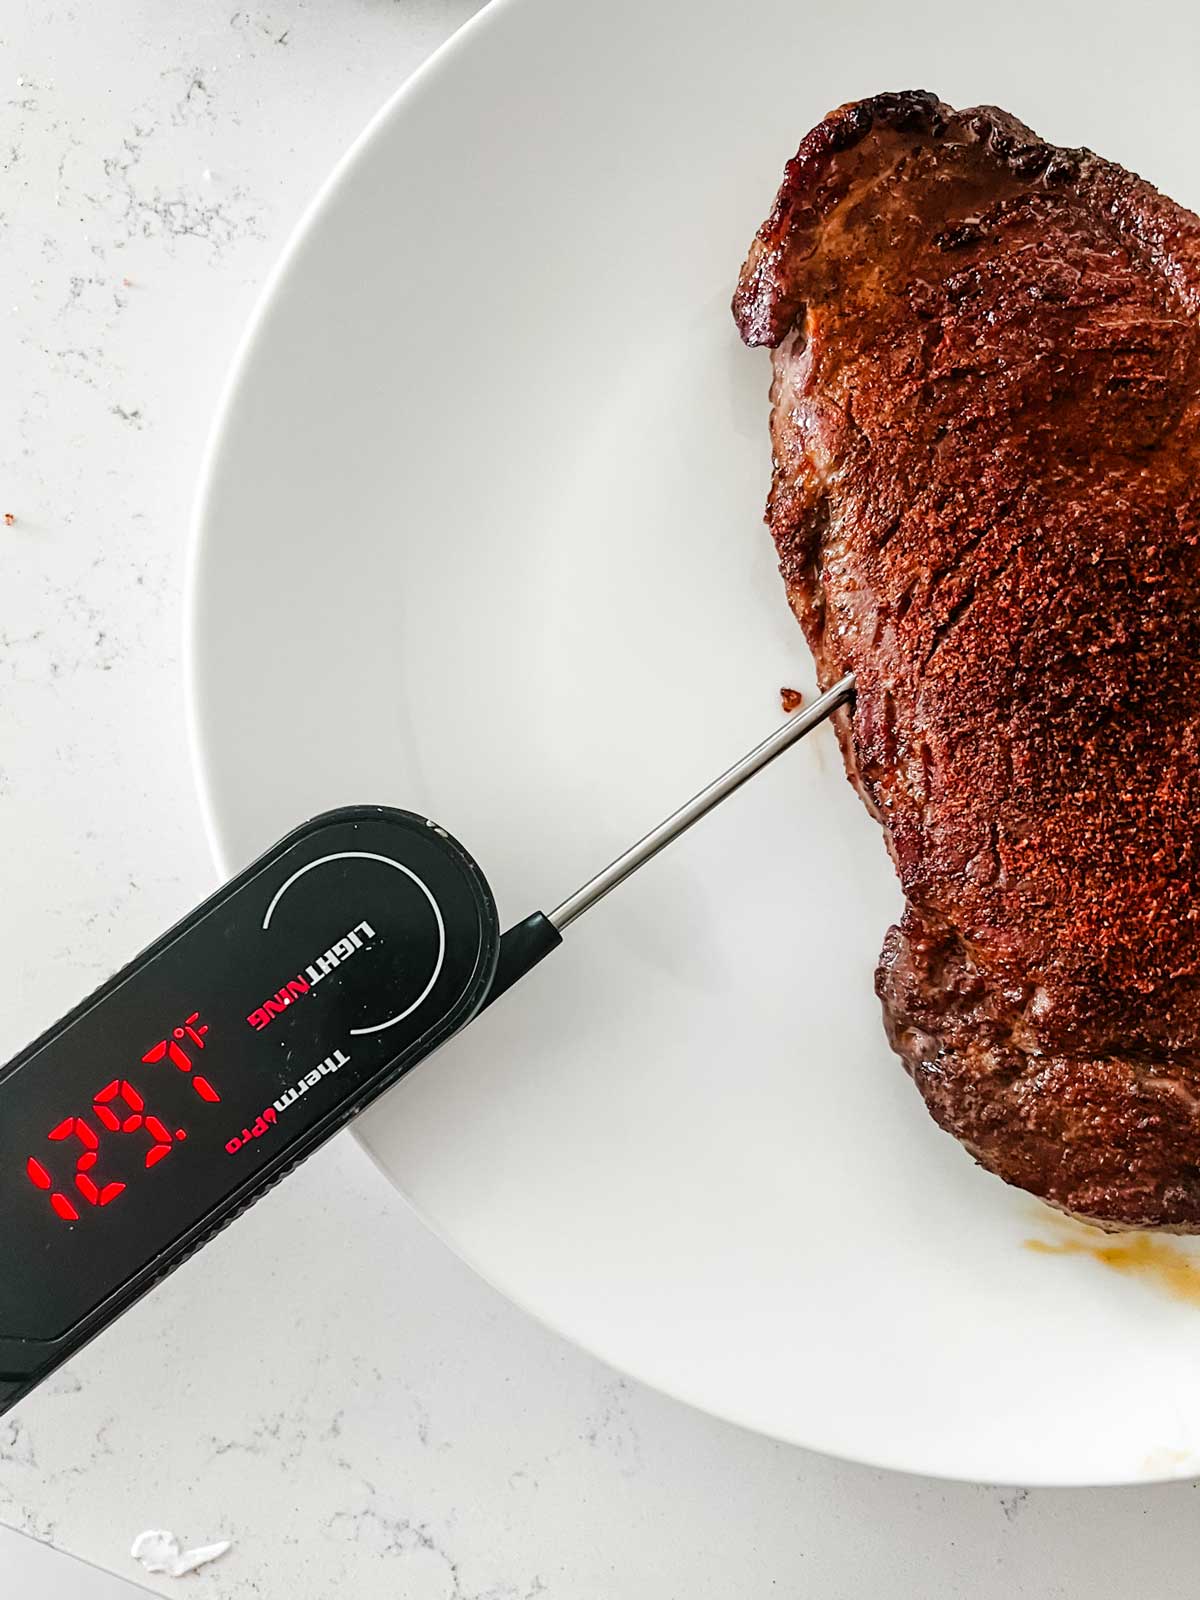 A steak that has been cooked in the Ninja Foodi to almost 130° F with a meat thermometer displaying the internal temperature.